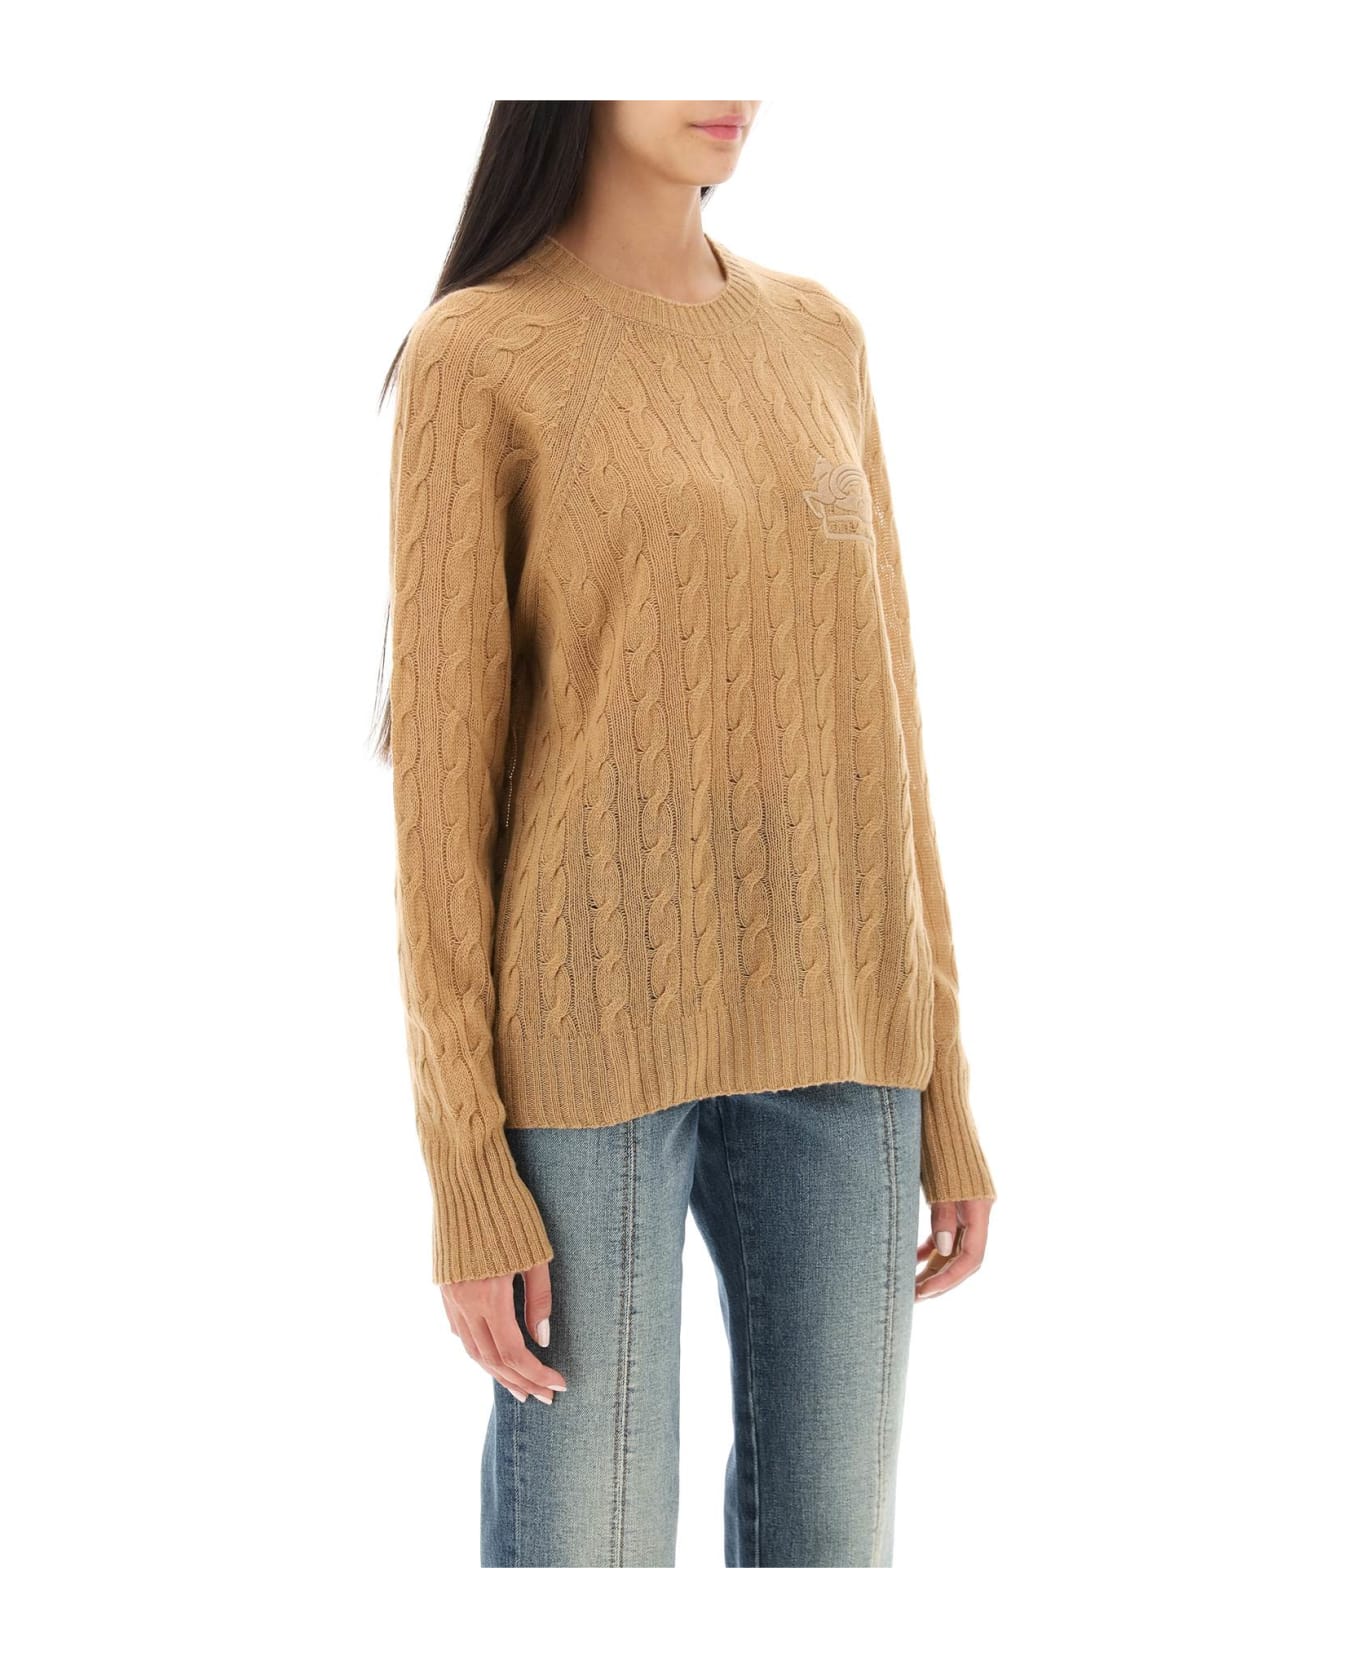 Etro Cashmere Sweater With Pegasus Embroidery - BEIGE (Beige)